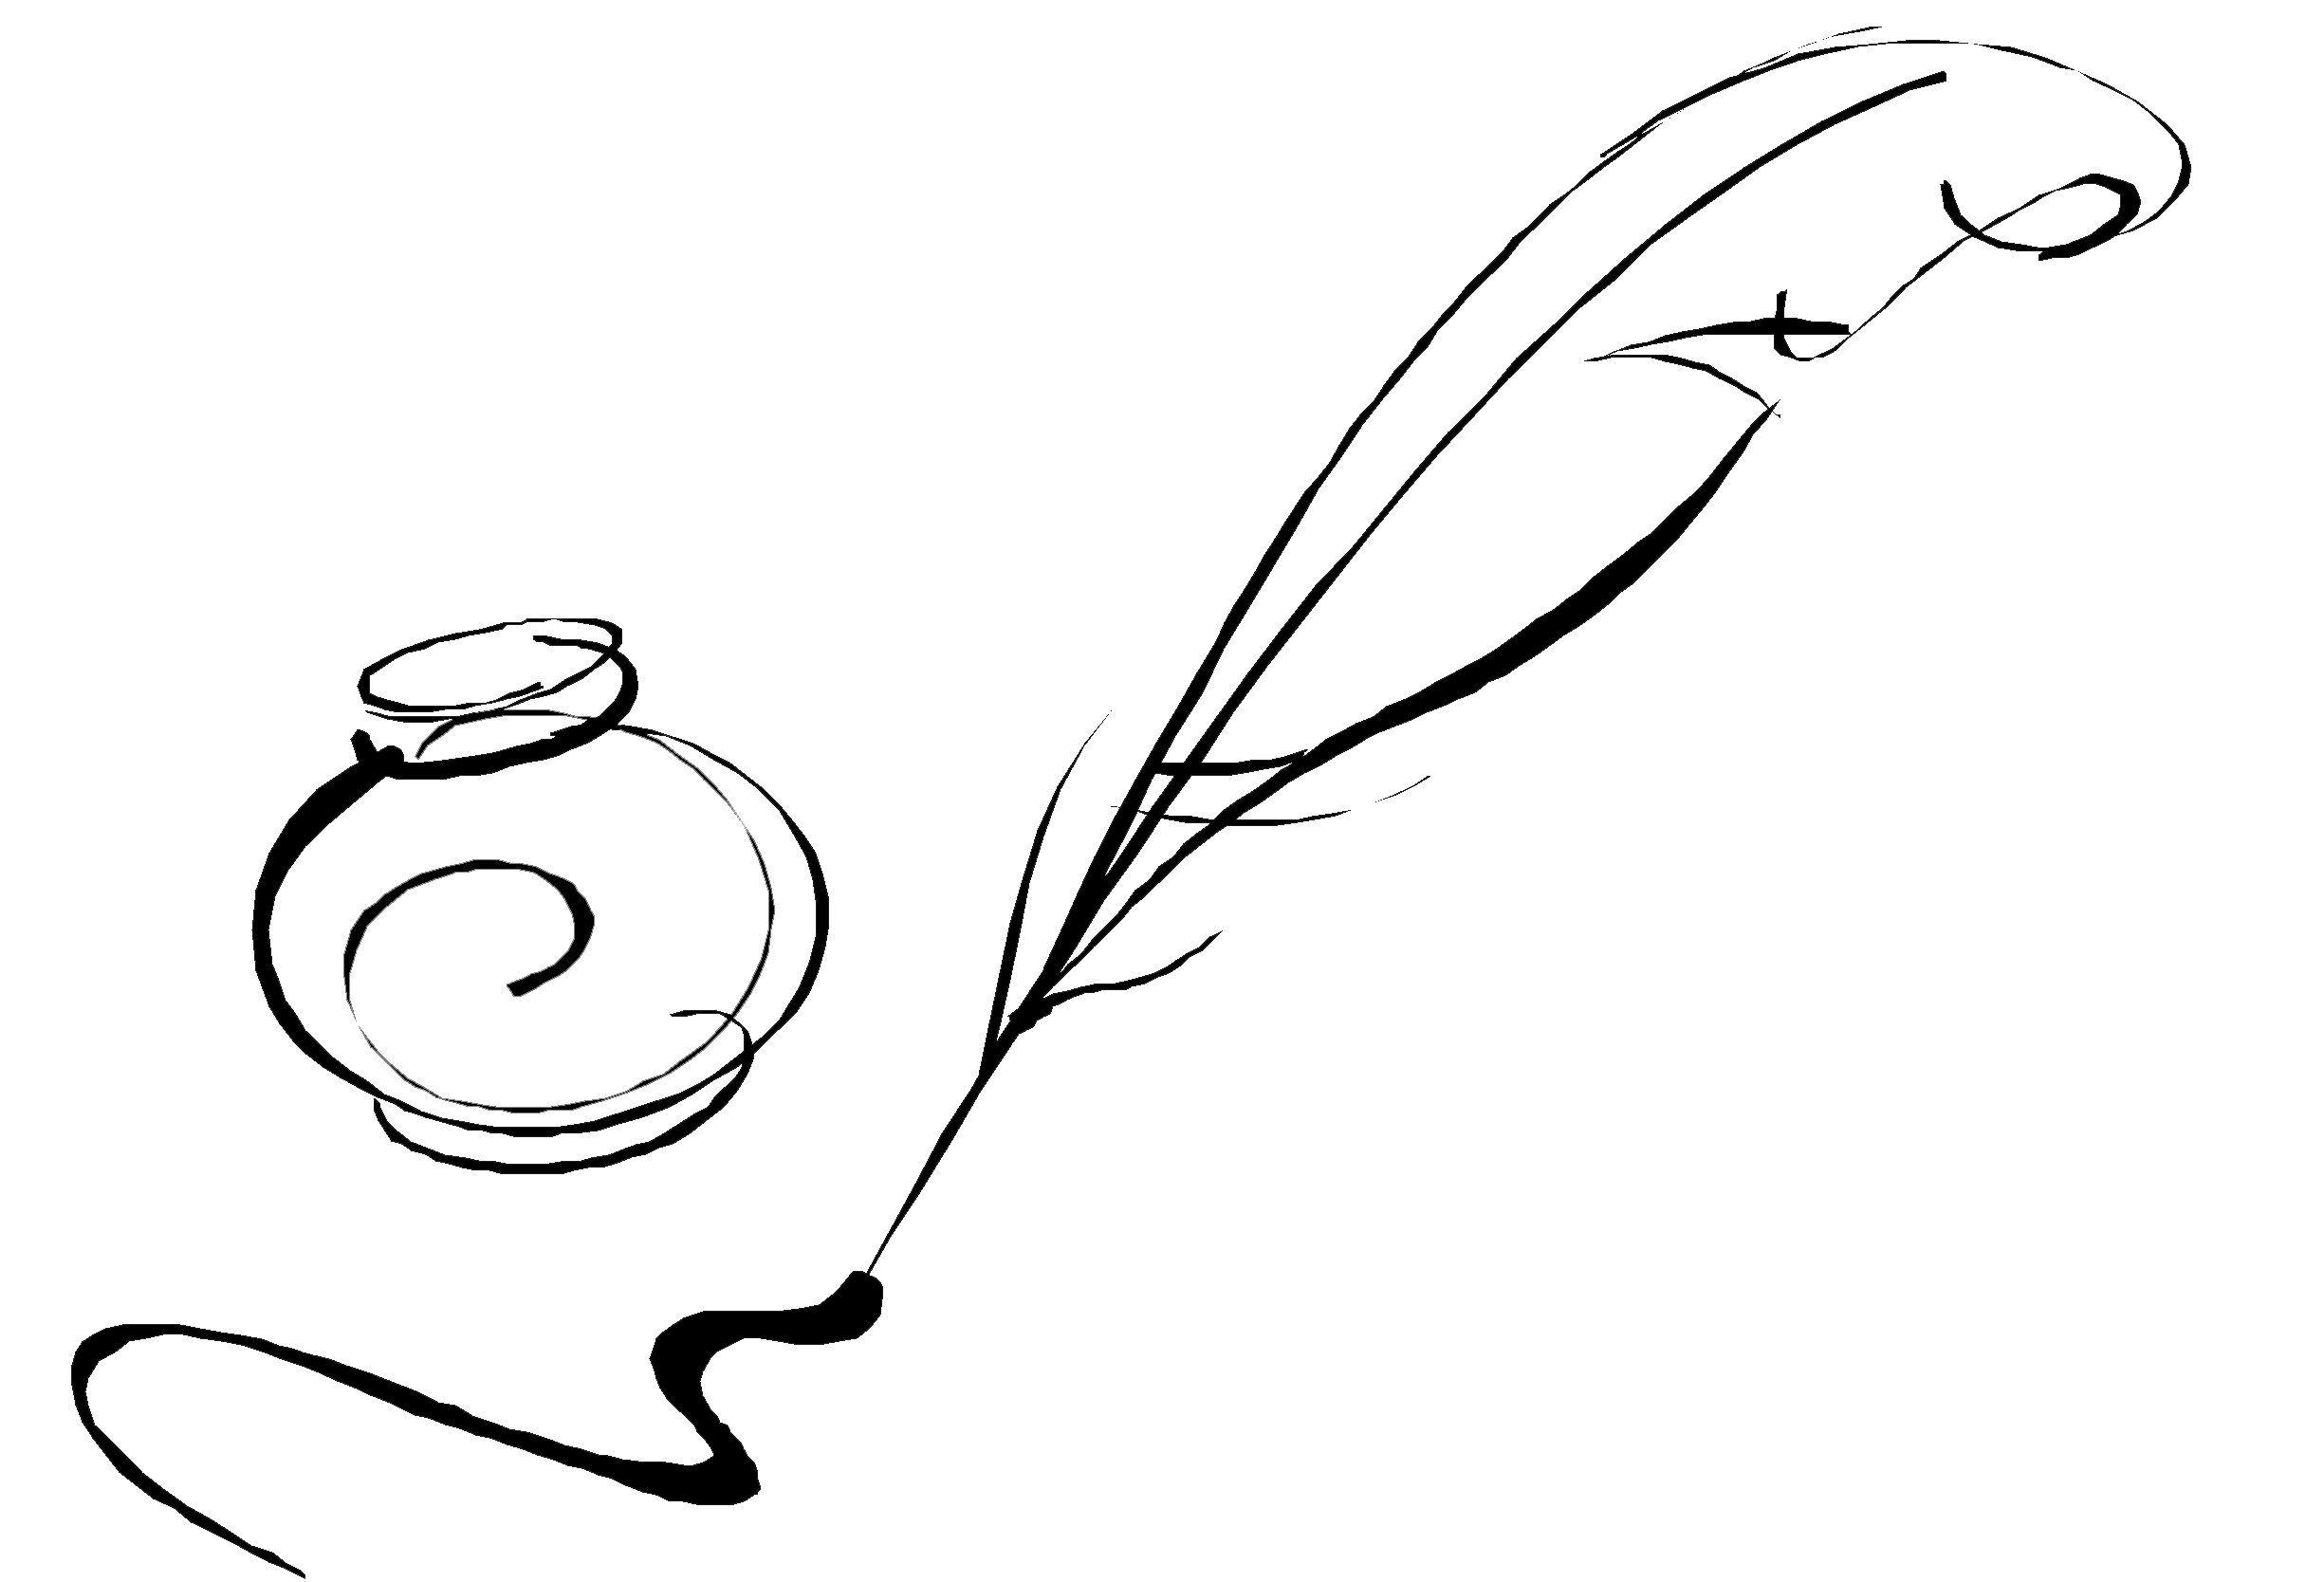 Quill Pen Logo - image For > Feather Pen Logo. FEATHER FILES 1. Quill tattoo